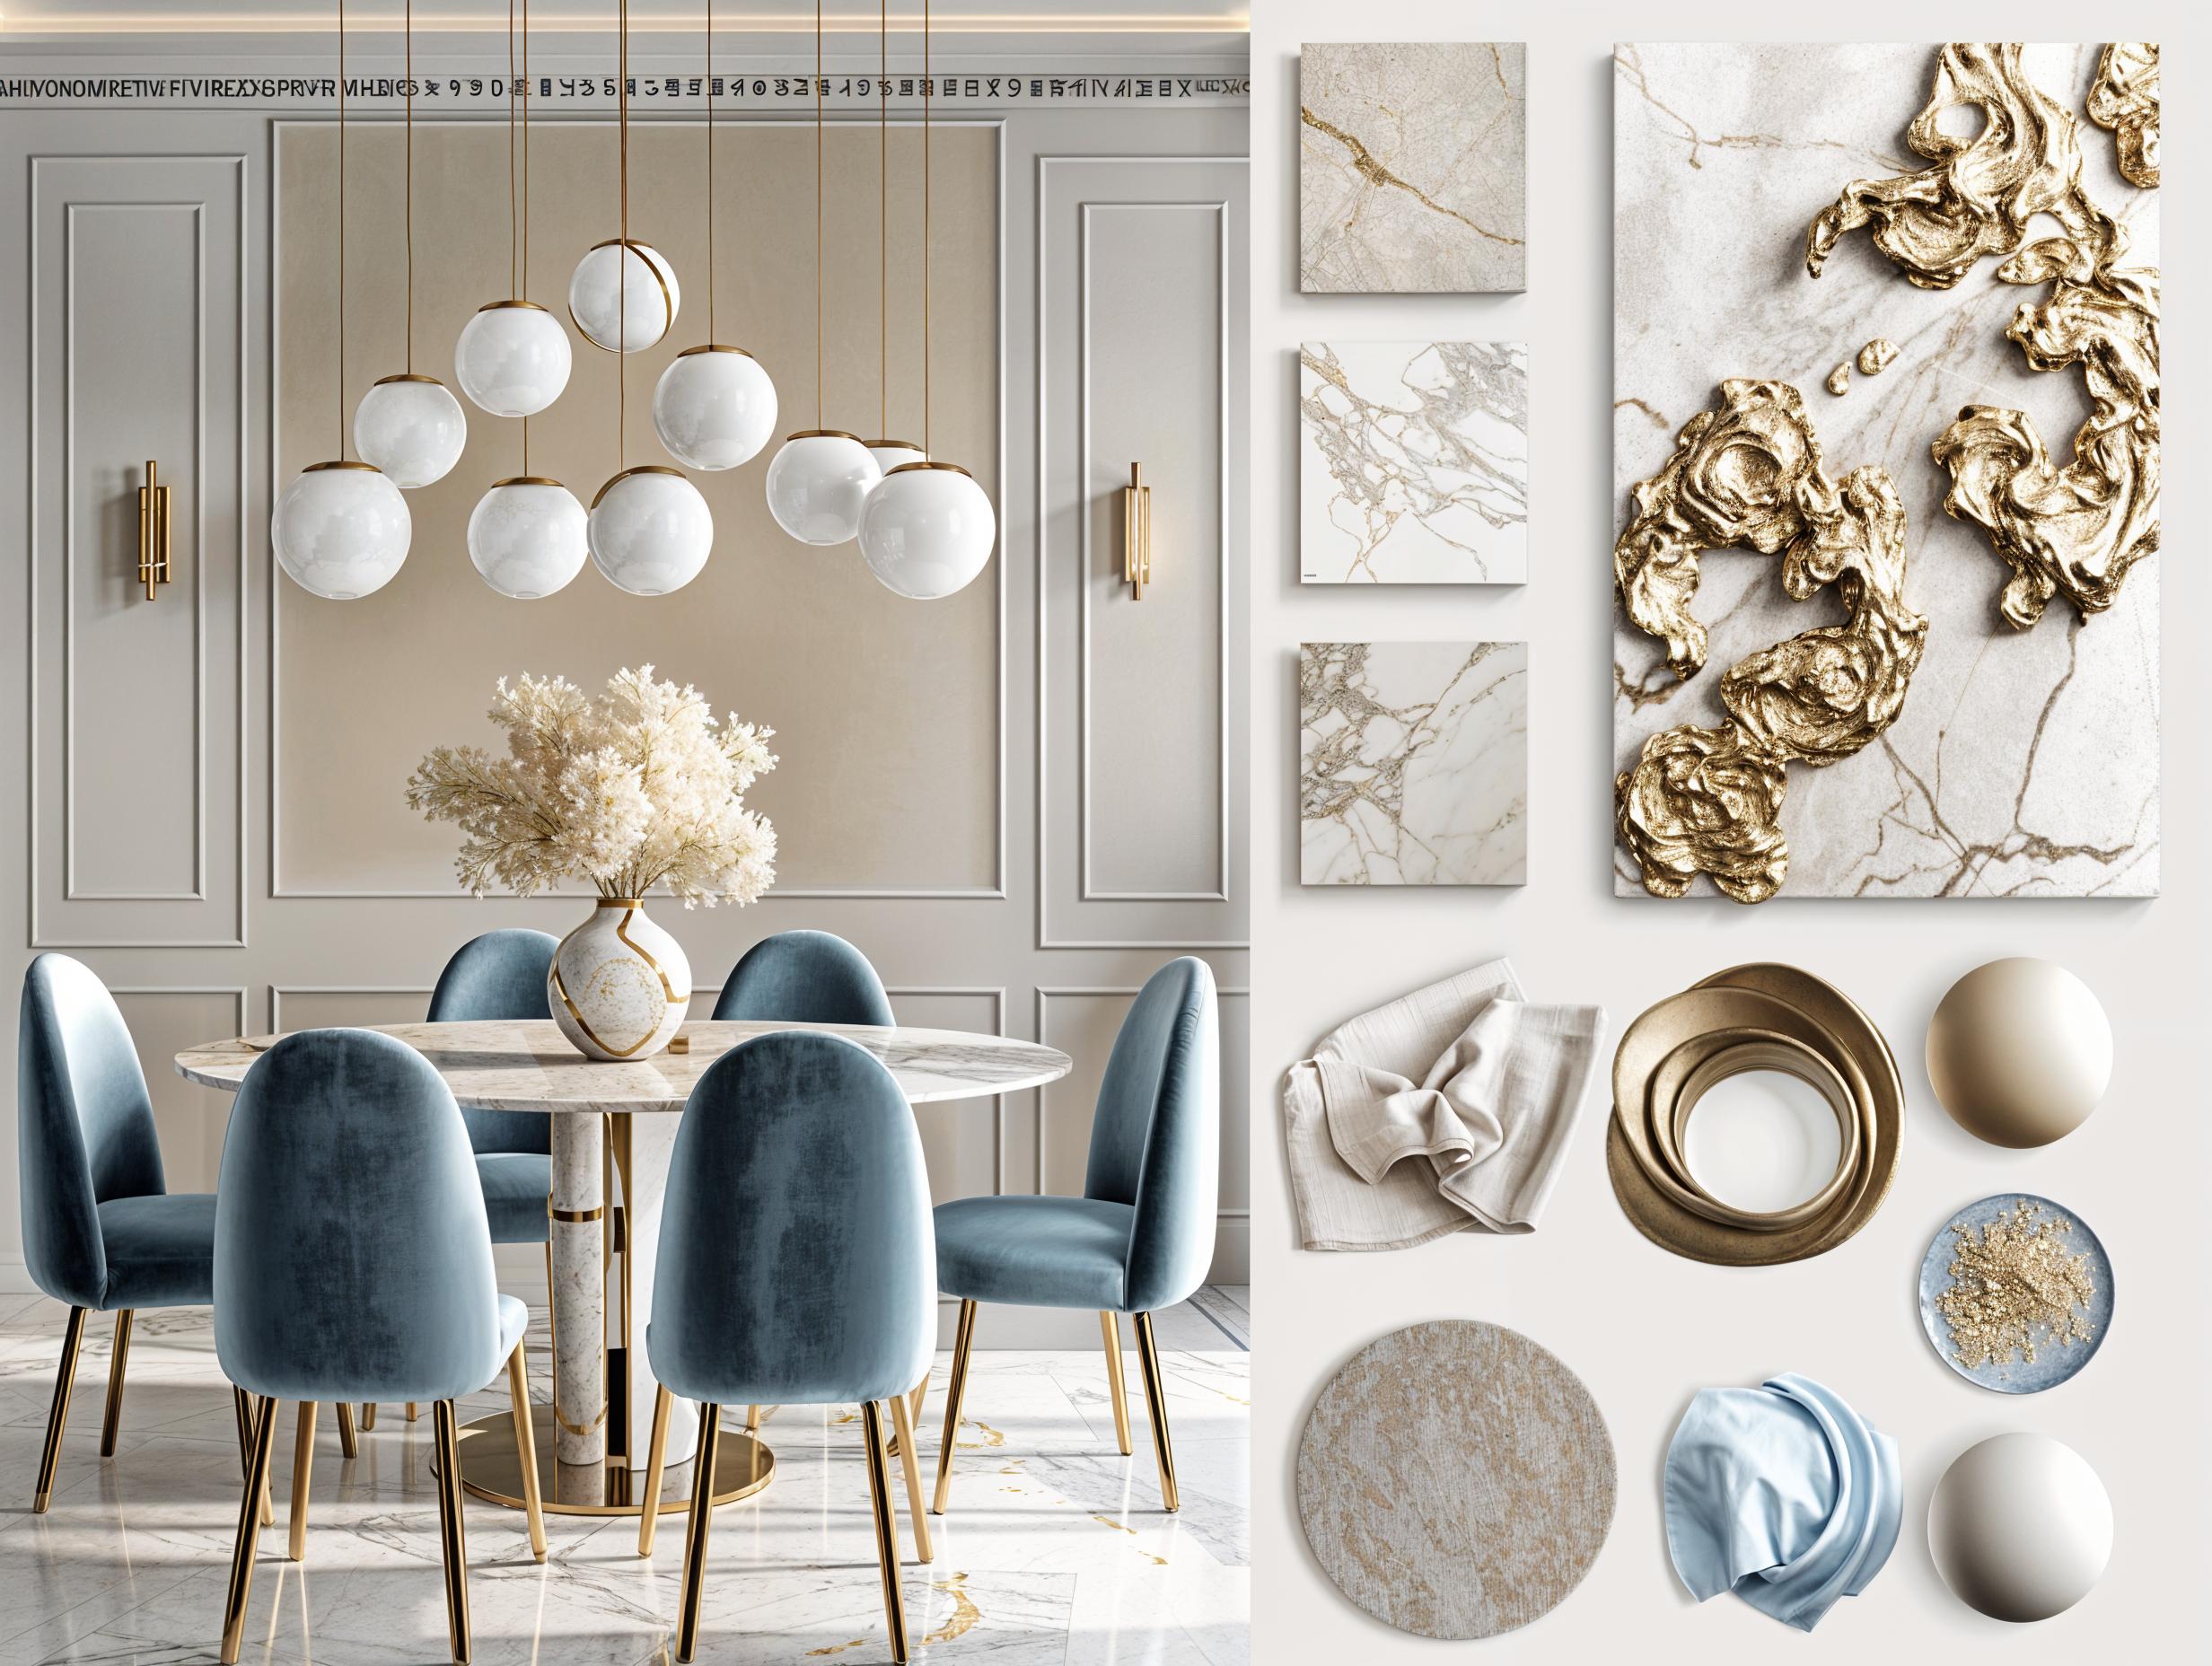 Elegant dining room interior with mood board showcasing the color palette and textures used in our Interior Design Services.